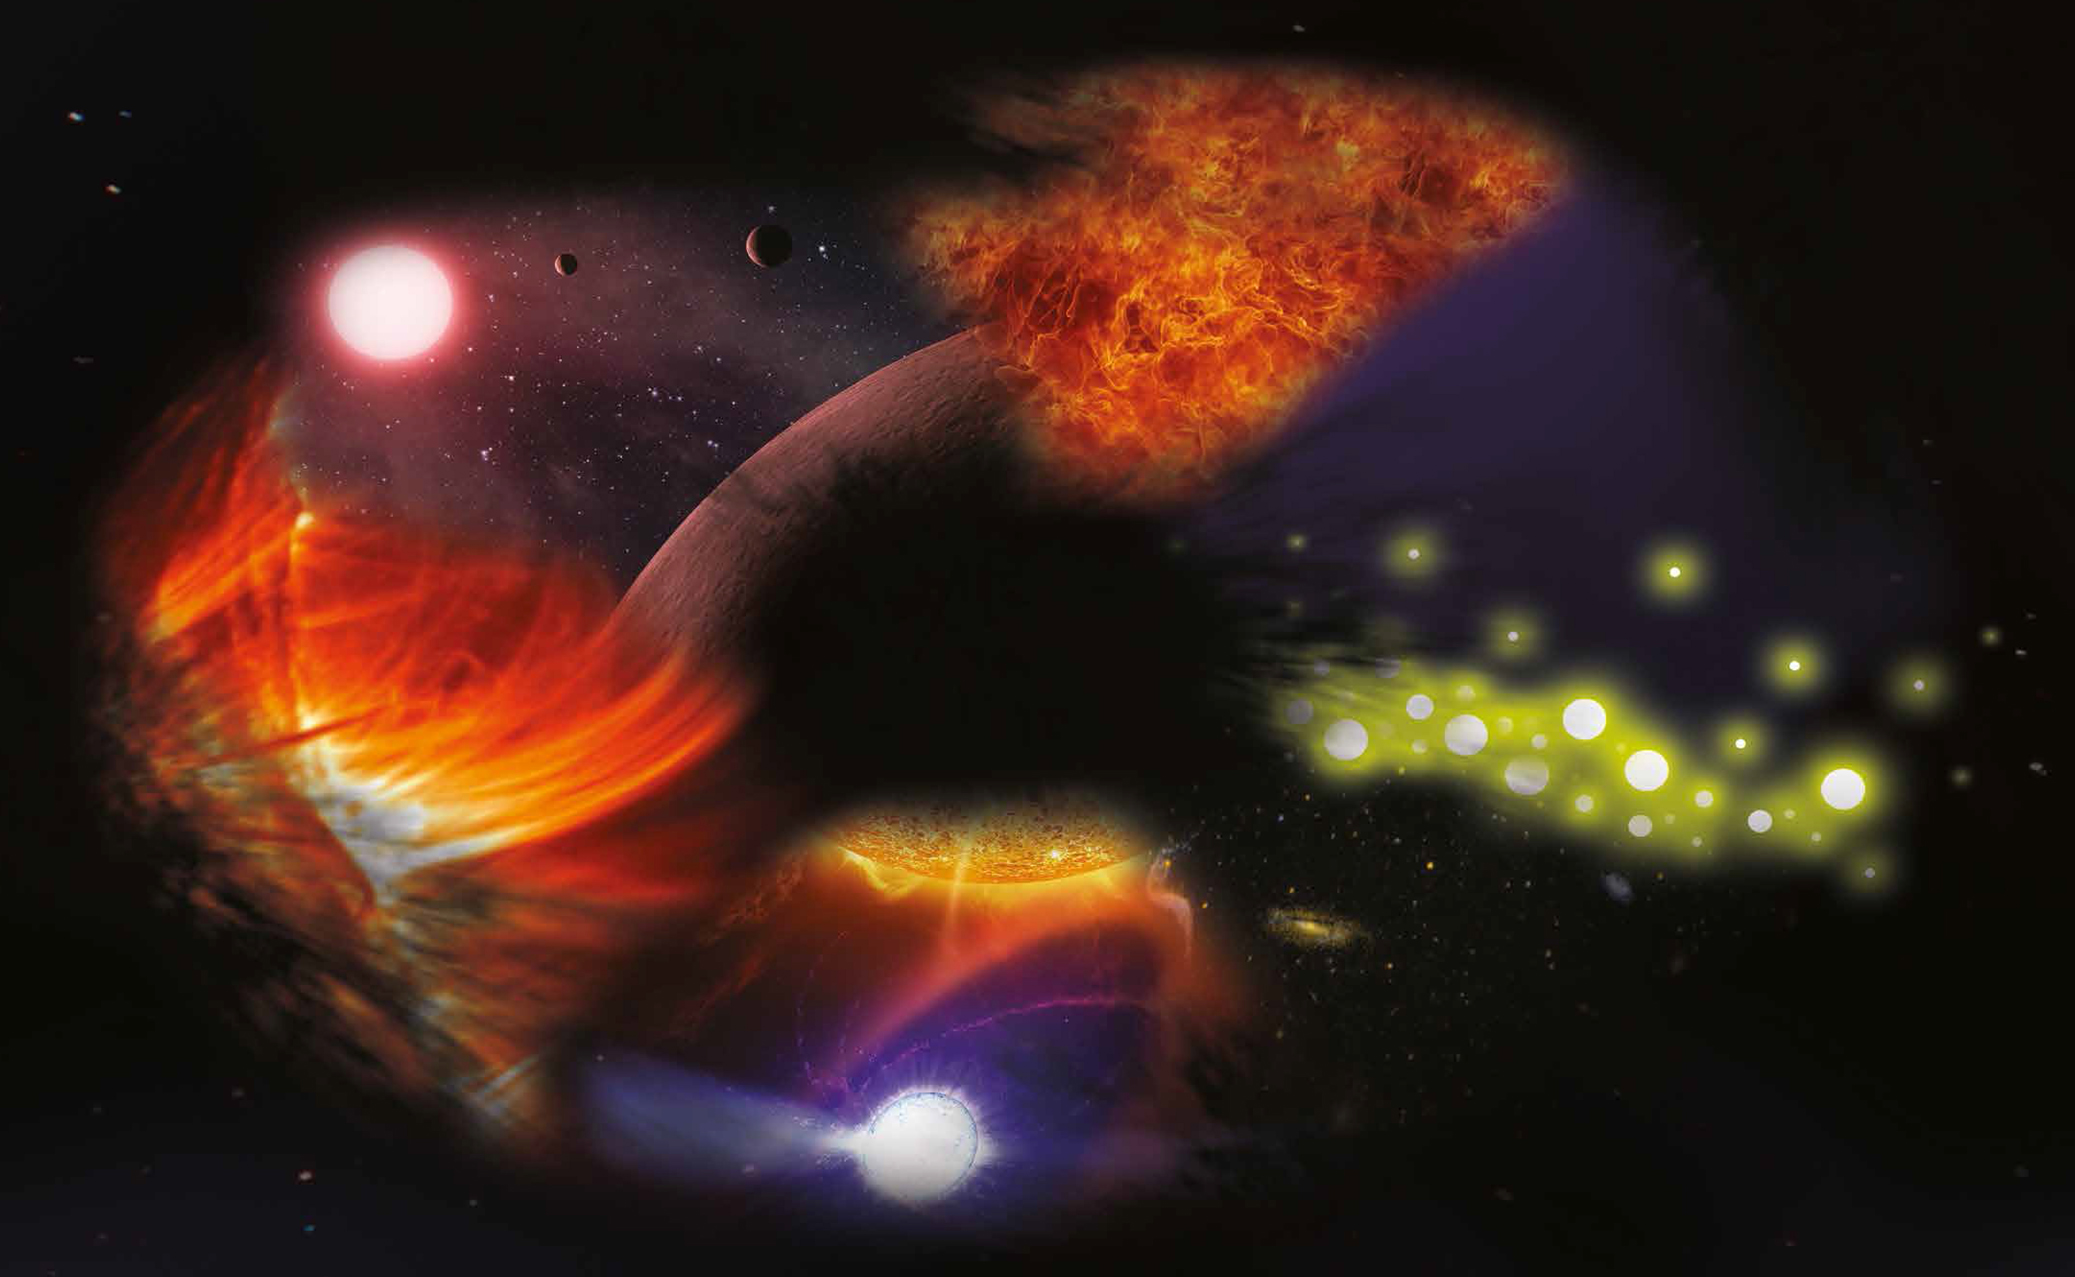 Black background with a mosaic of colourful images depicting the types of science to be done with the Square Kilometre Array. Background photo credit: Luigi Strano. Science image credits and acknowledgements: Djorgovski et al, (Caltech) (EoR image); Casey Reed (Pulsar image); NASA/JPL-Caltech/SSC (Galaxy evolution image-NGC 3190 Field); NASA/Stanford-Lockheed Institute for Space Research’s TRACE Team (Cosmic Magnetism image – Sun’s Corona); NASA/JPL-Caltech (Cradle of life image).